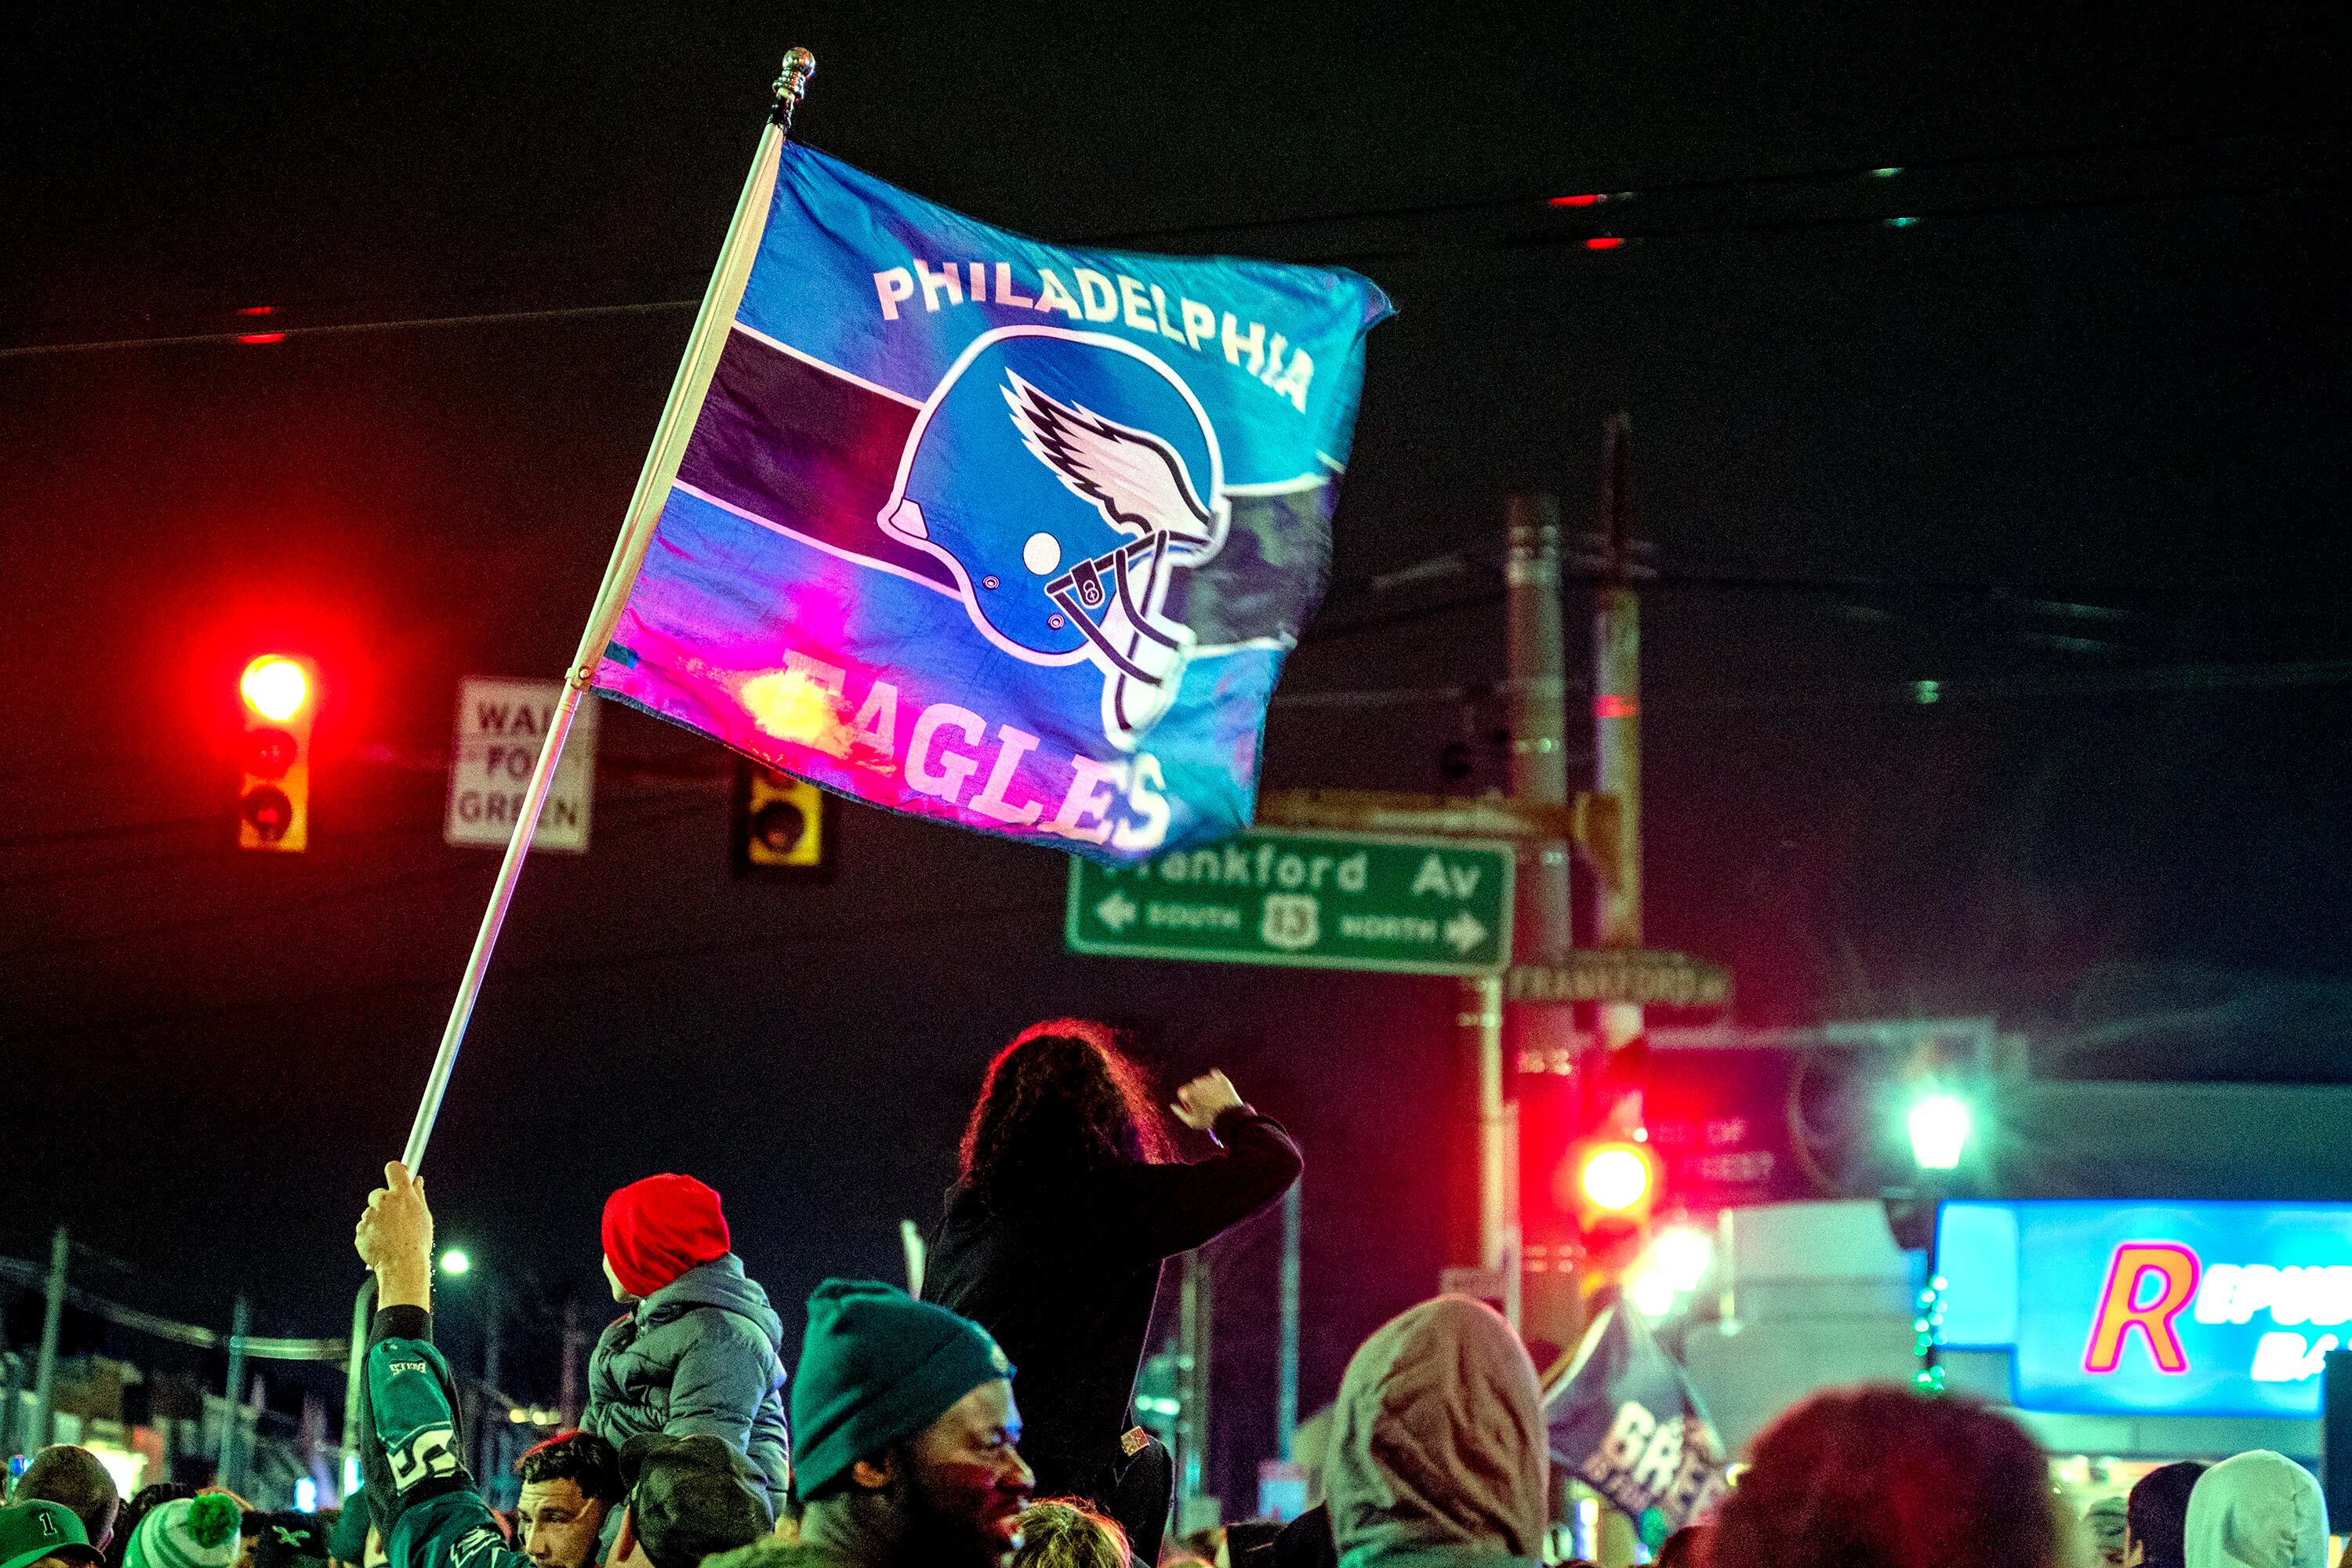 King of Prussia, PA, Fans of the Philadelphia Eagles - the NFC